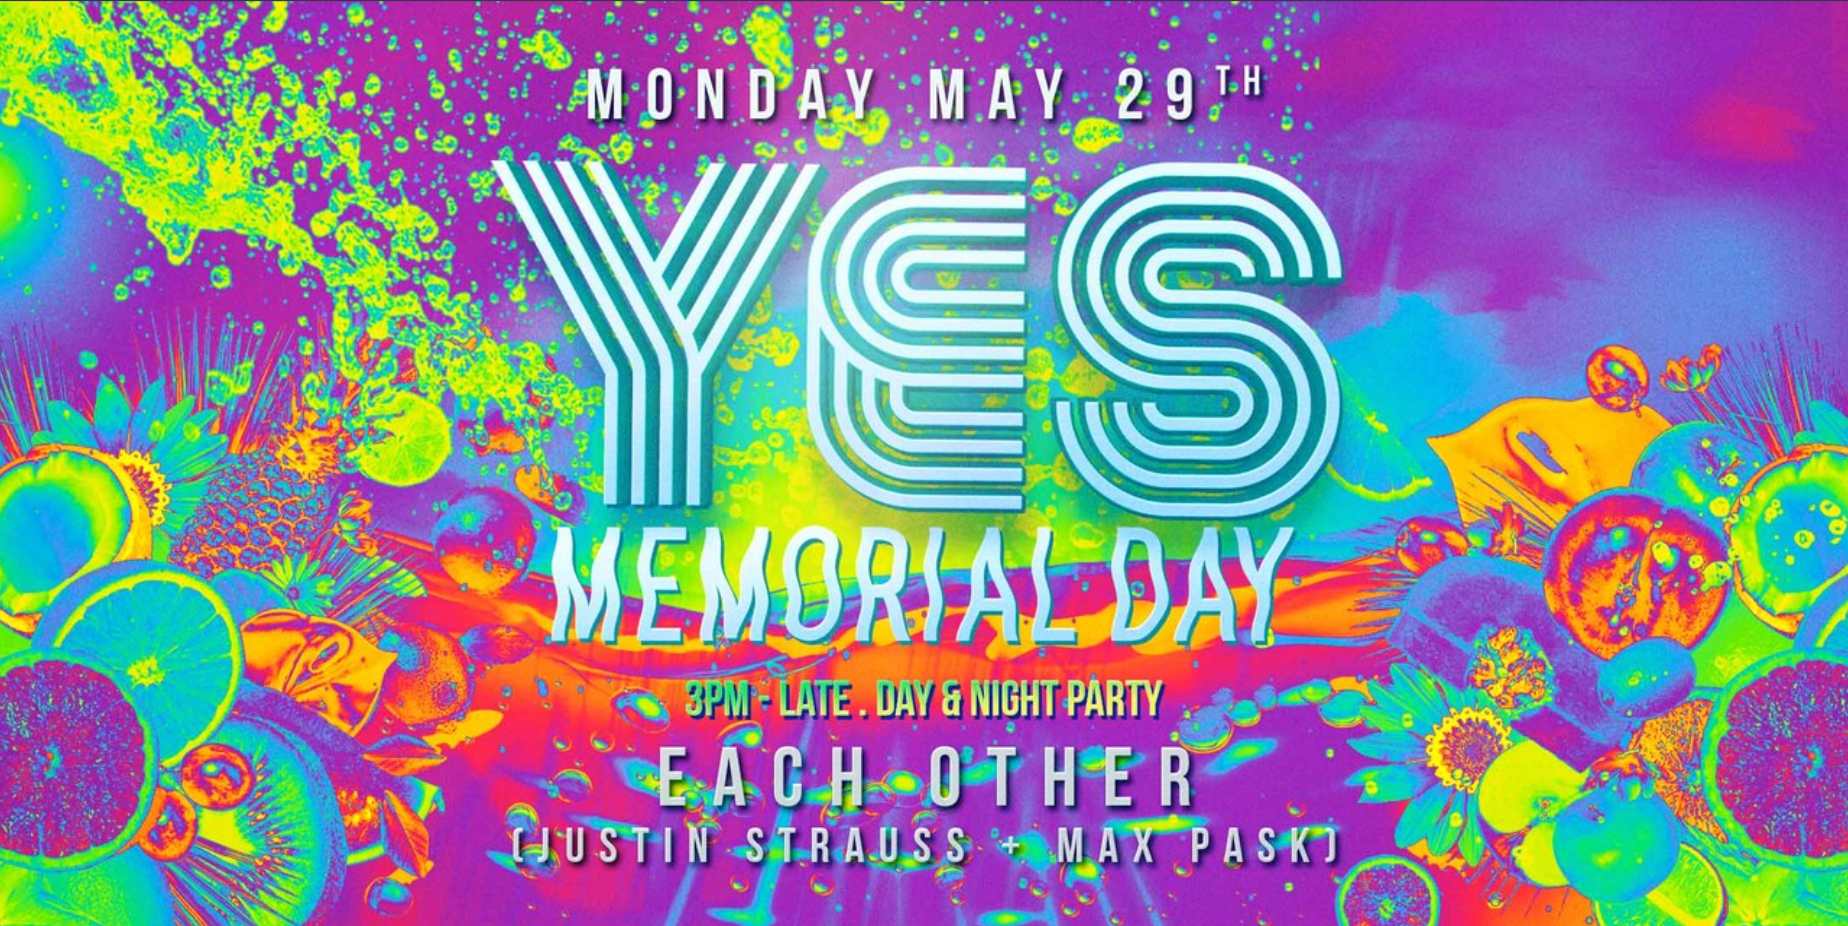 YES Memorial Day: Each Other (Justin Strauss + Max Pask) - Página frontal